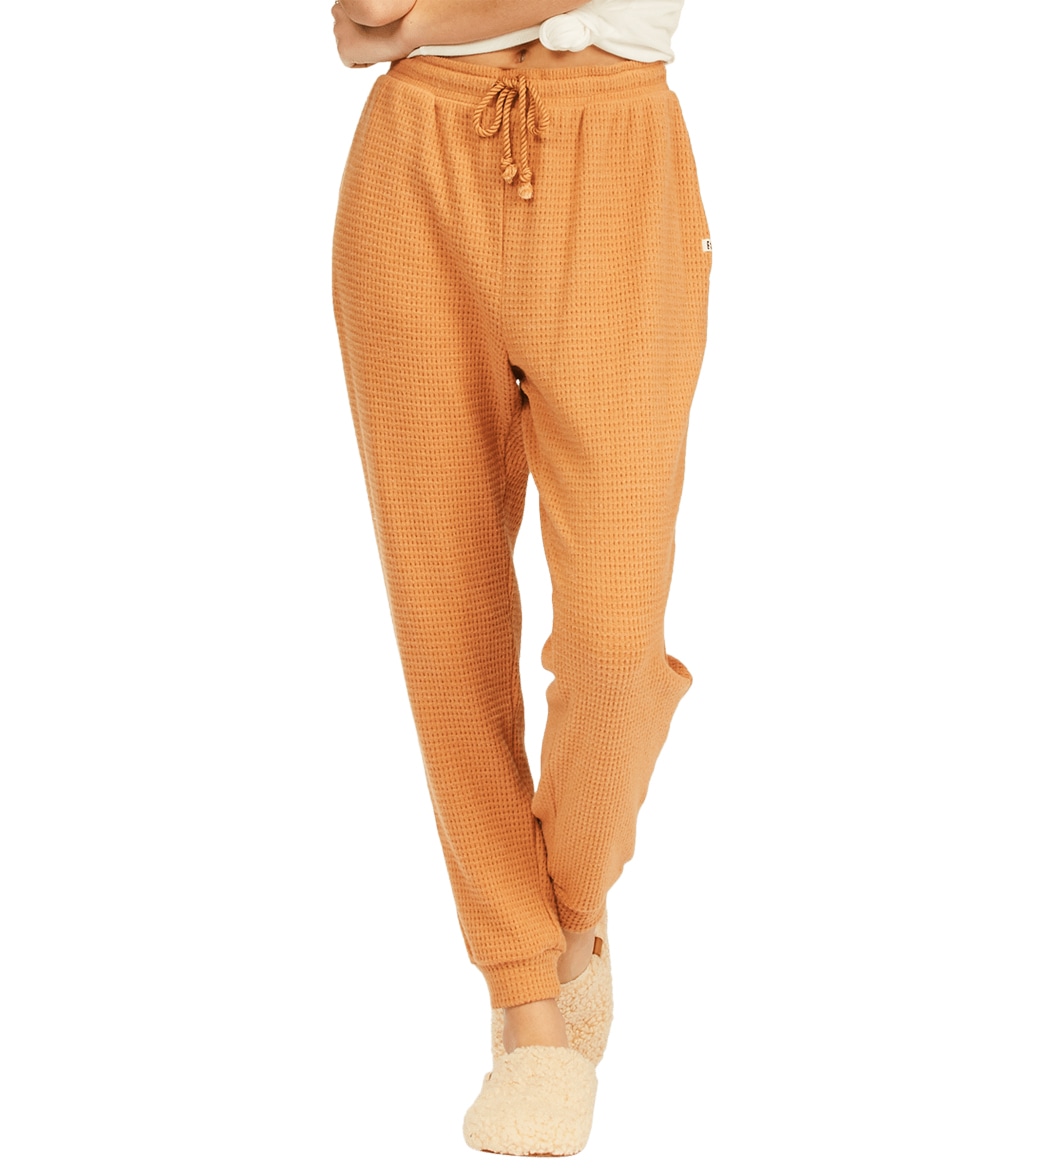 Billabong Women's Adelaide Pants - Toffee Large - Swimoutlet.com